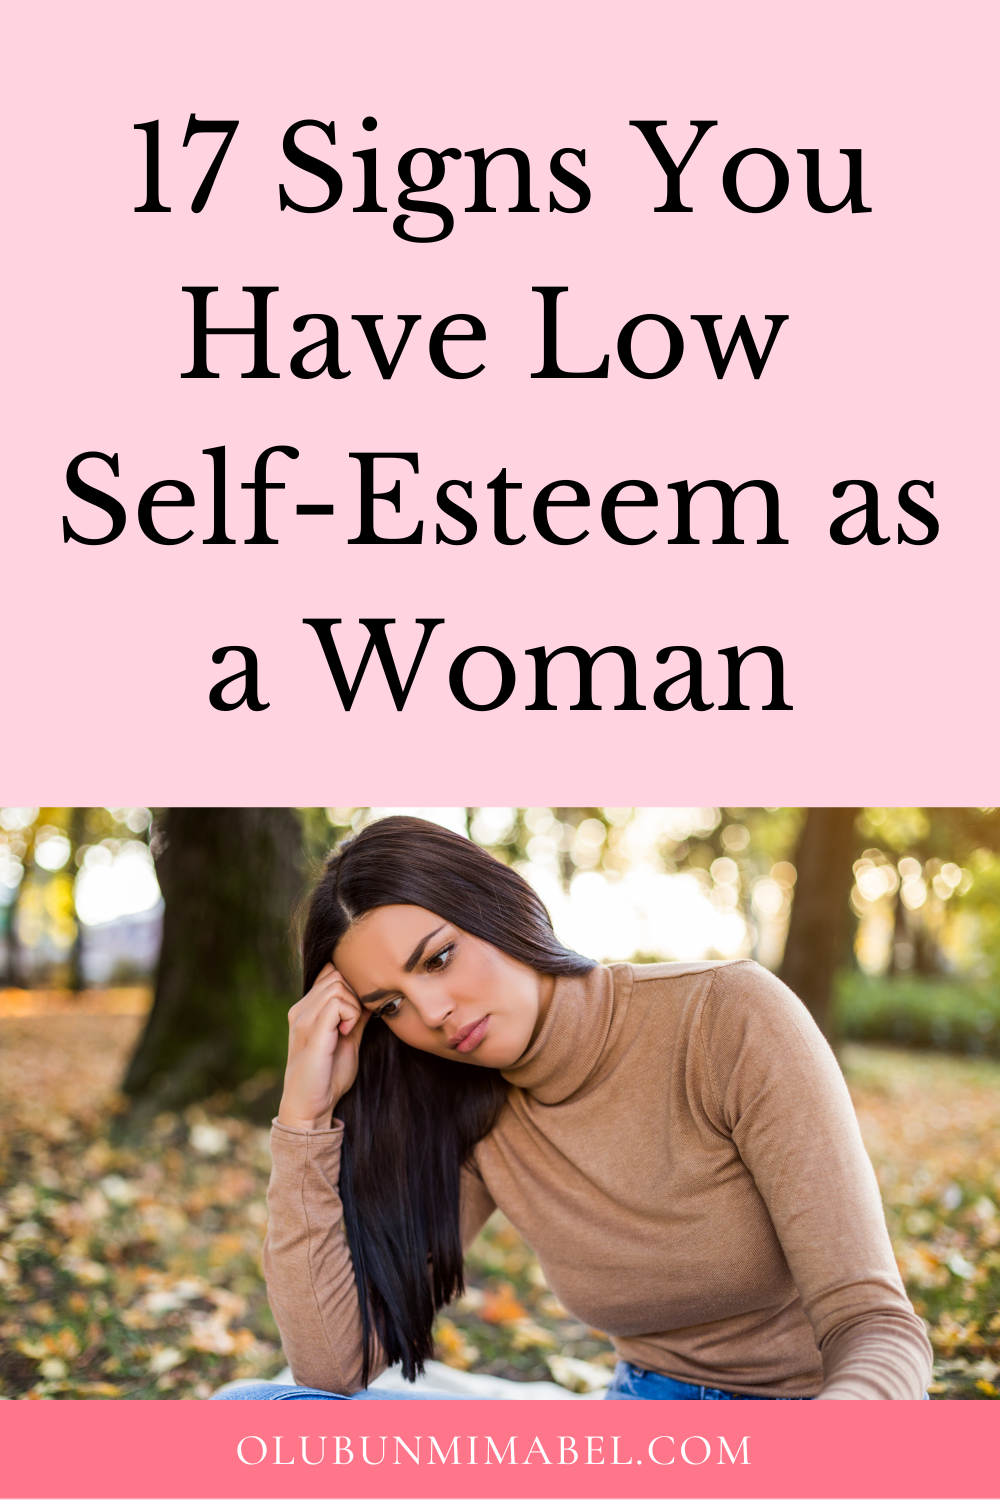 Signs of Low Self-Esteem in a Woman